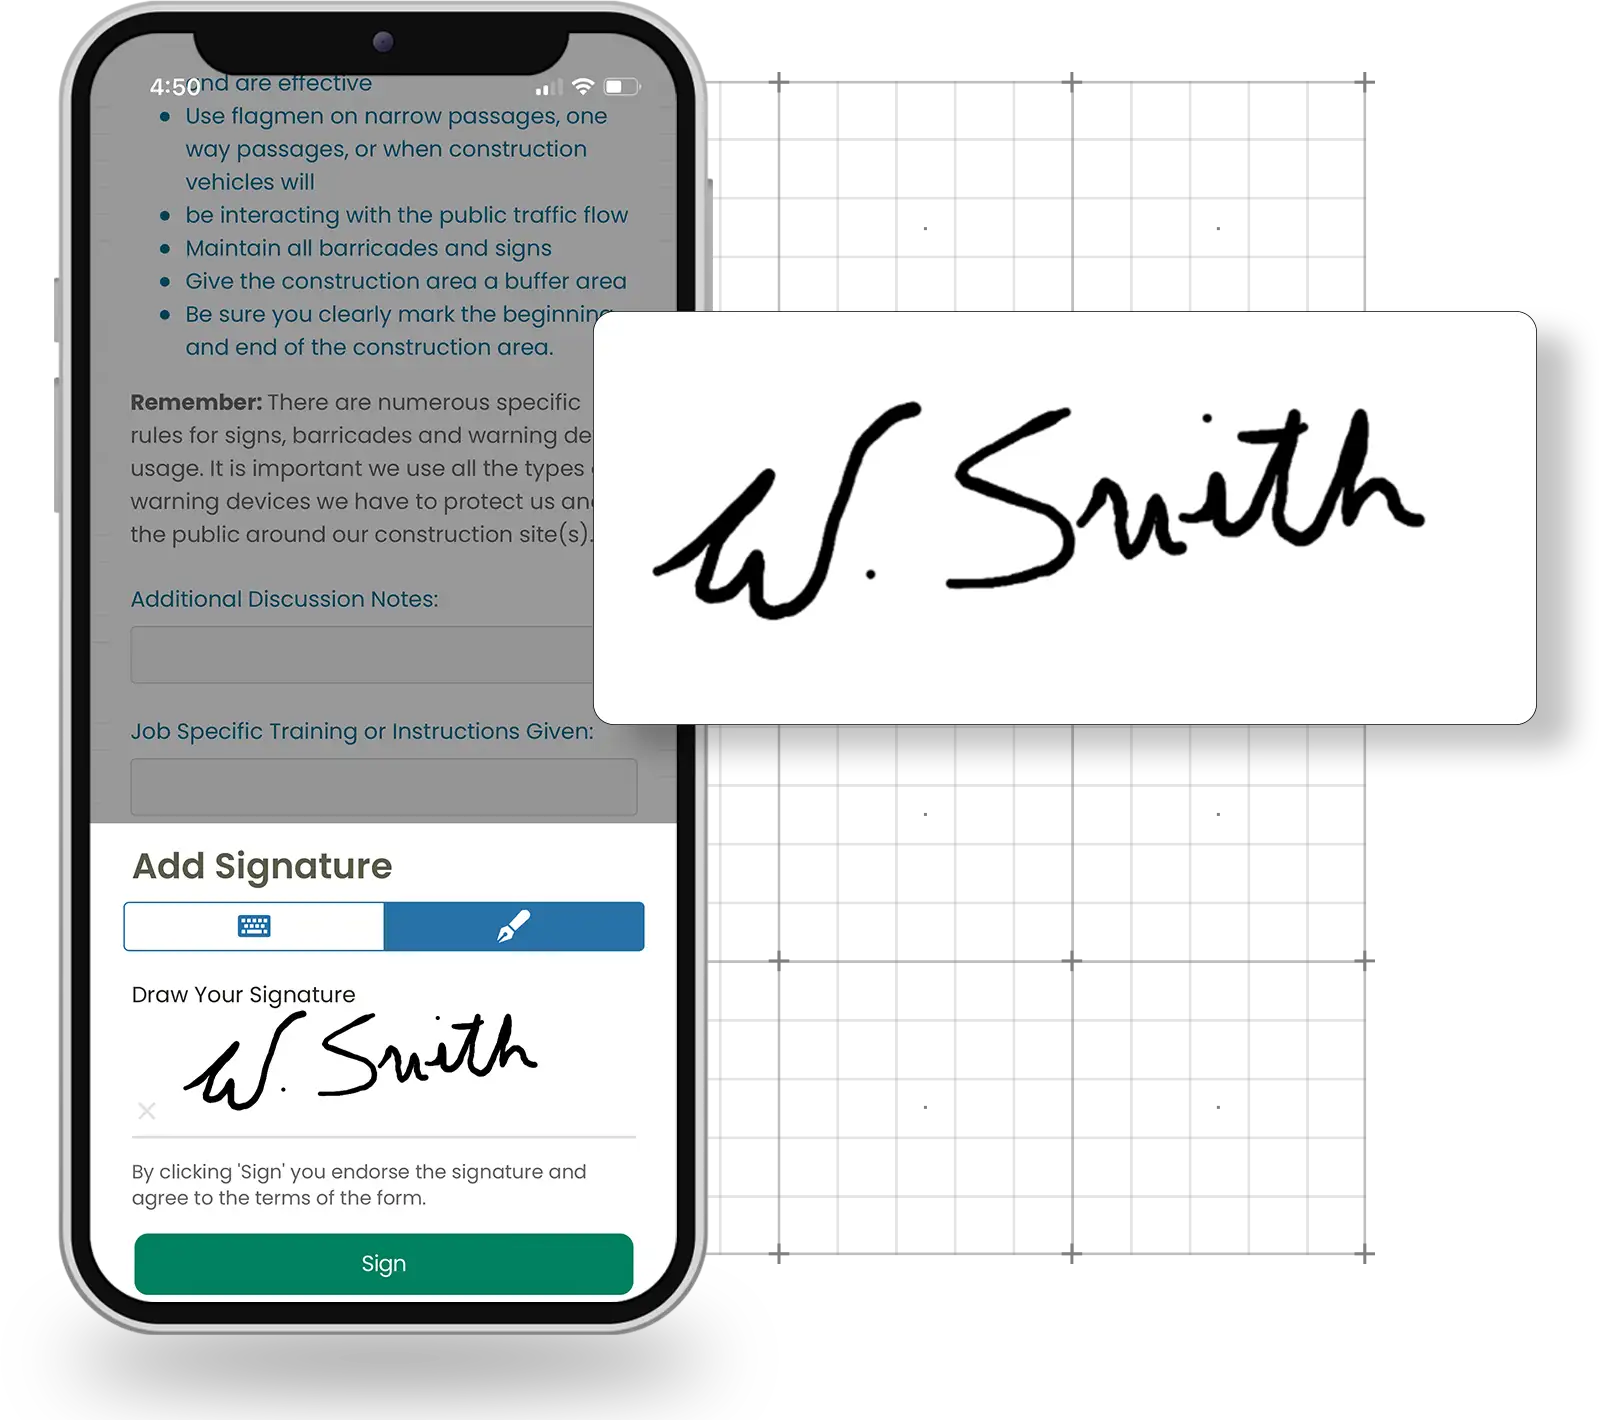 Showing the signatures feature in the Corfix construction document management mobile app